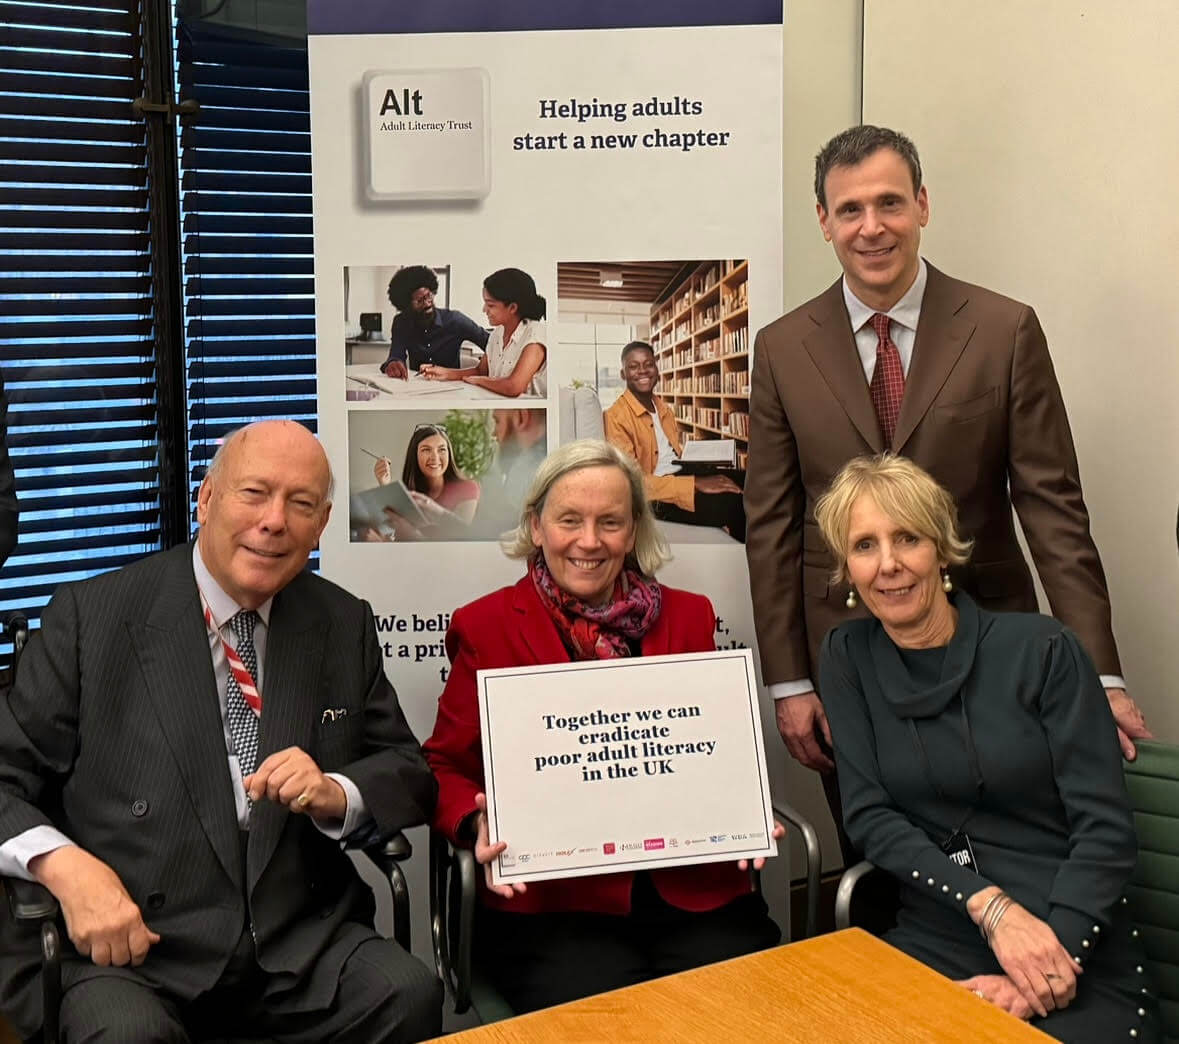 ALT calls on parliamentarians to pledge greater action on boosting adult literacy – here pictured with Margaret Greenwood MP (Chair, APPG Adult Education) and ALT patron Lord Julian Fellowes.